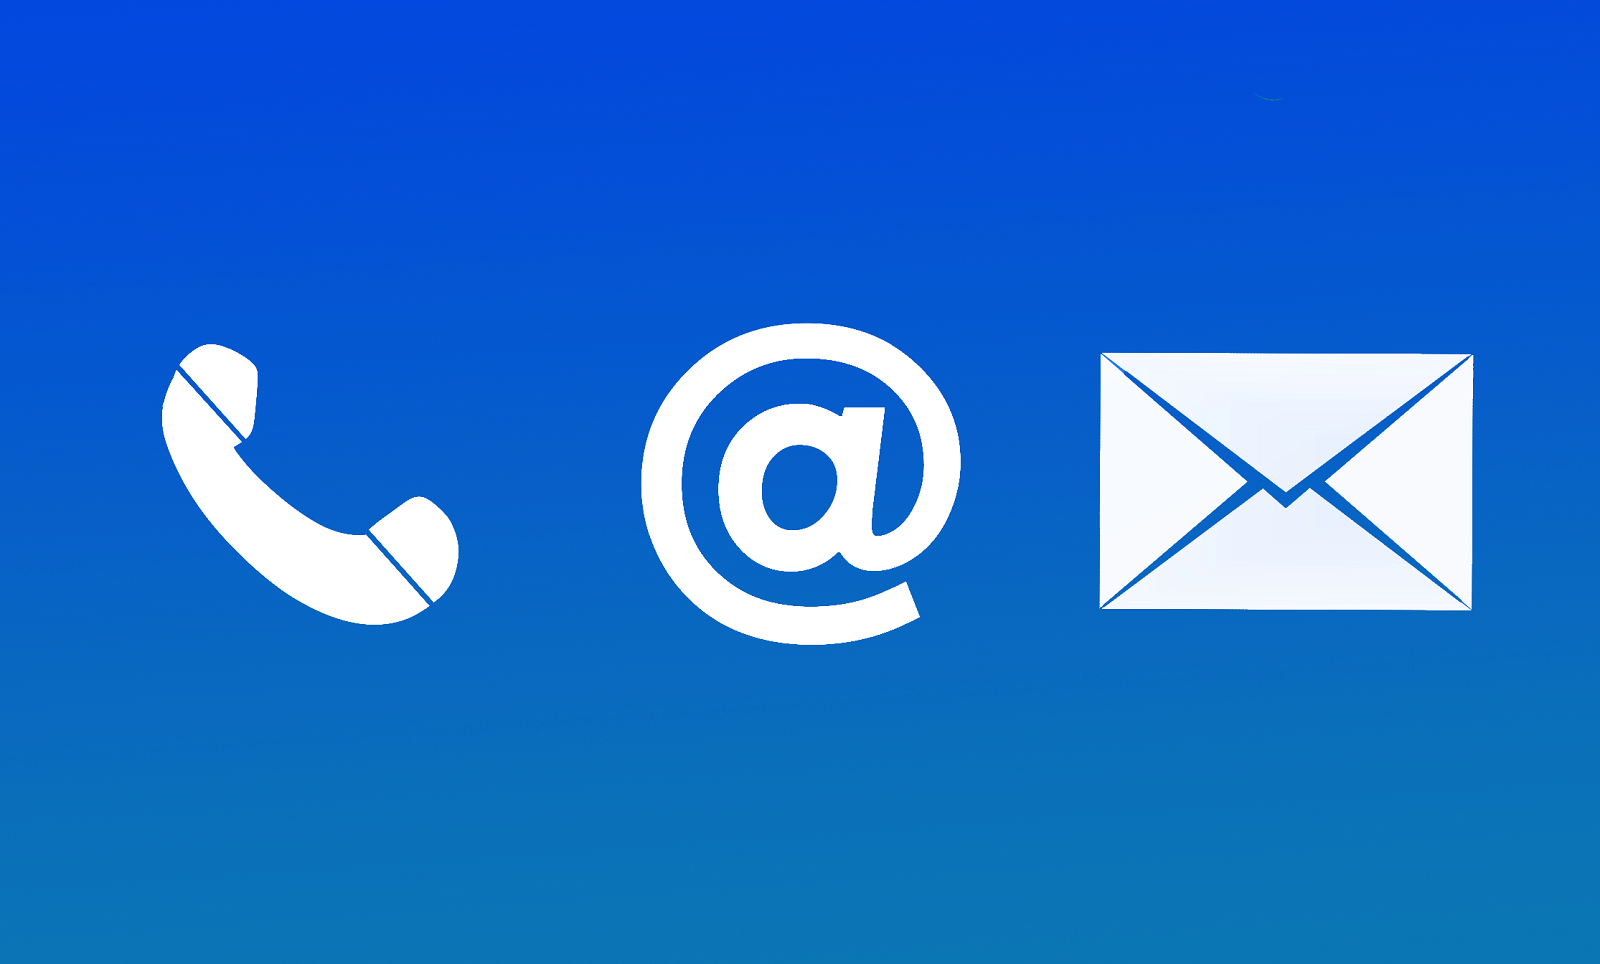 Contact us image - phone and email icons